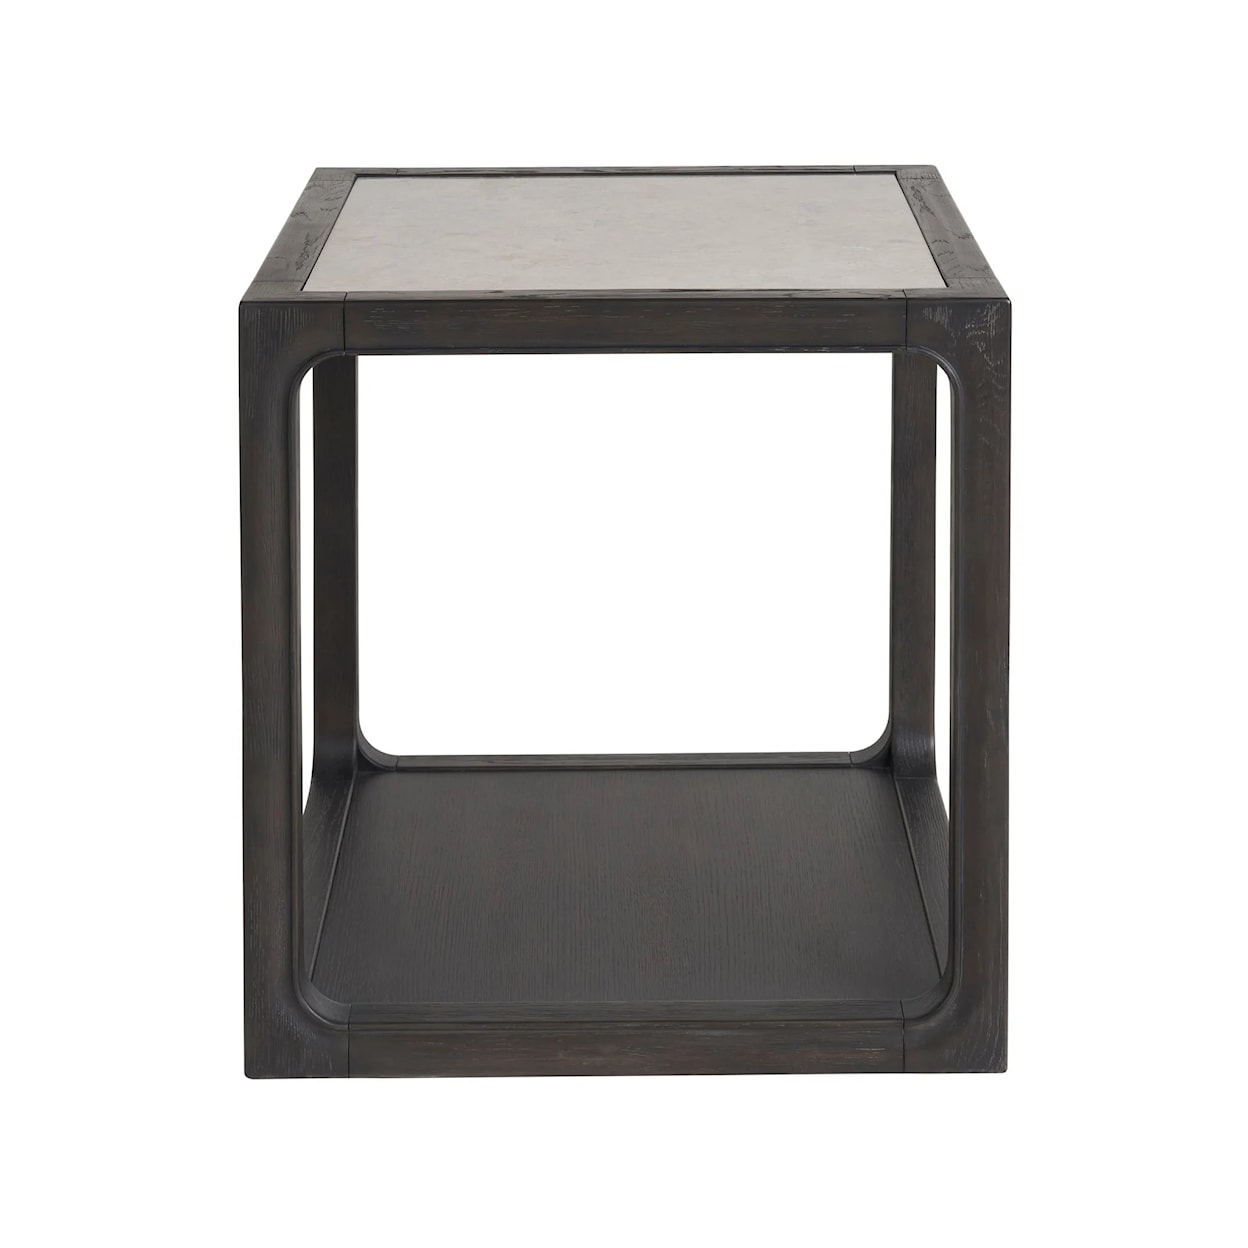 Universal COALESCE Living Room End Table